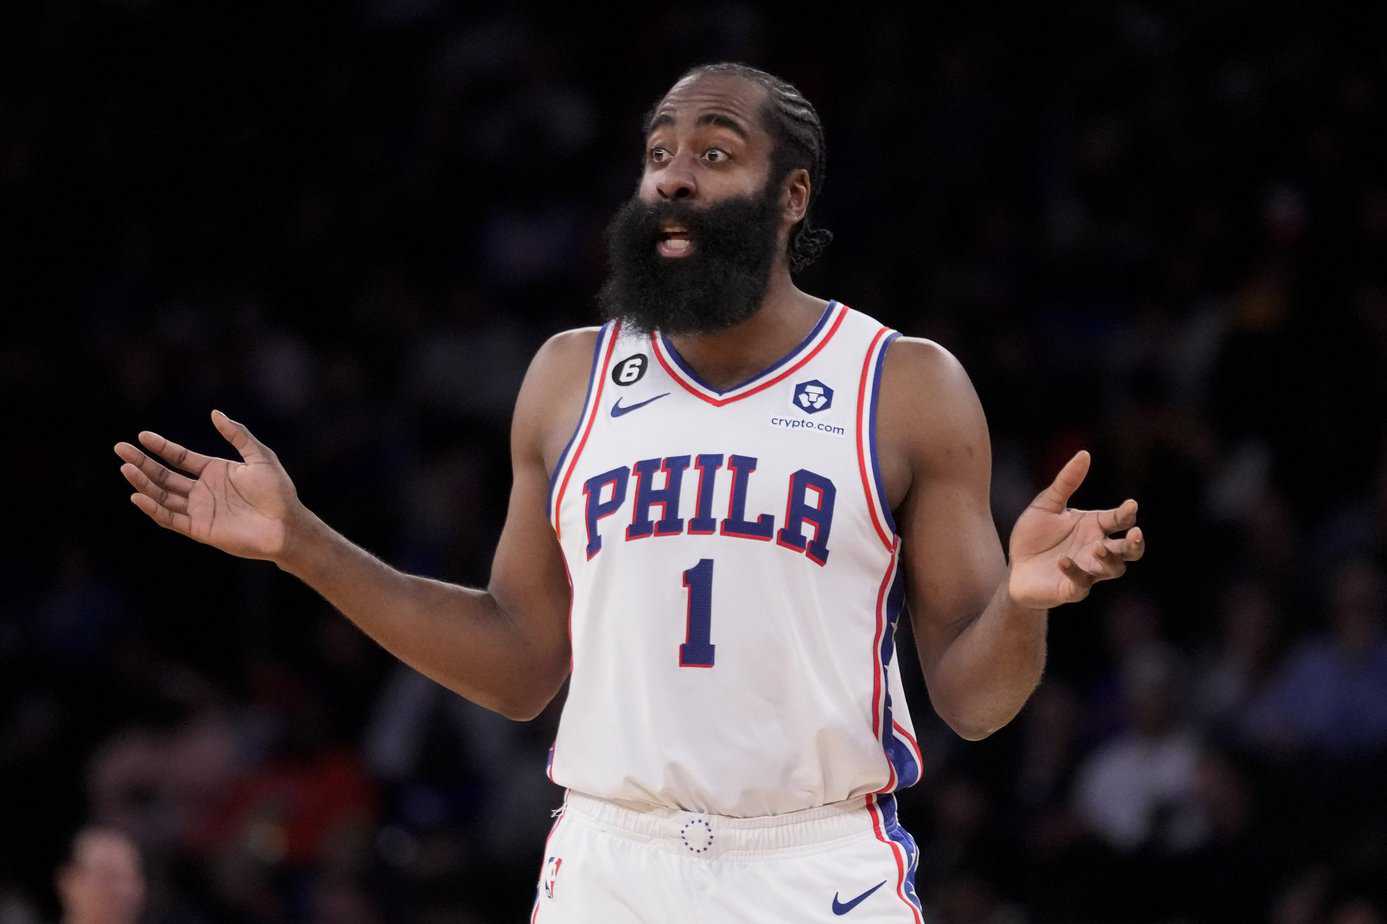 Underdog Fantasy has a fantastic No-Brainer offer for Sunday: James Harden O/U 0.5 Points. Add it to your lineup for a free space!